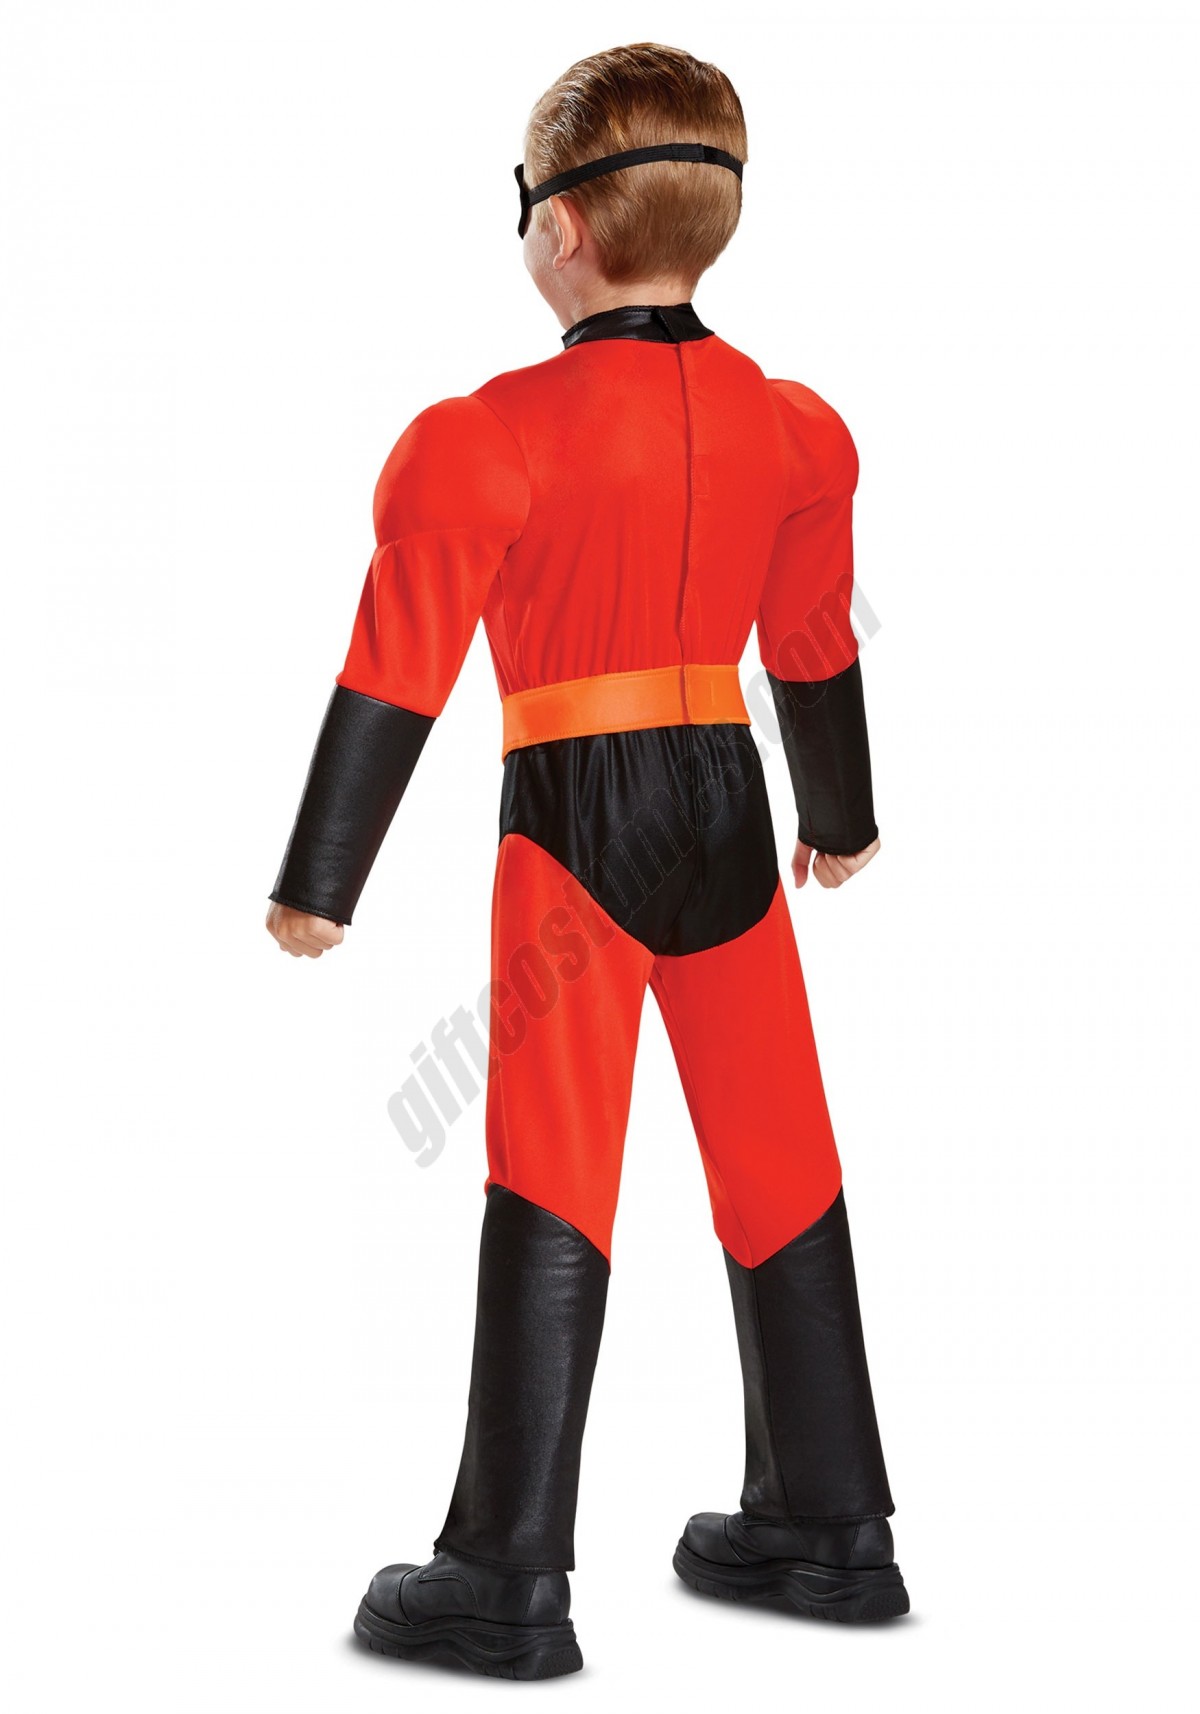 Disney Incredibles 2 Classic Dash Muscle Toddler Costume Promotions - -1